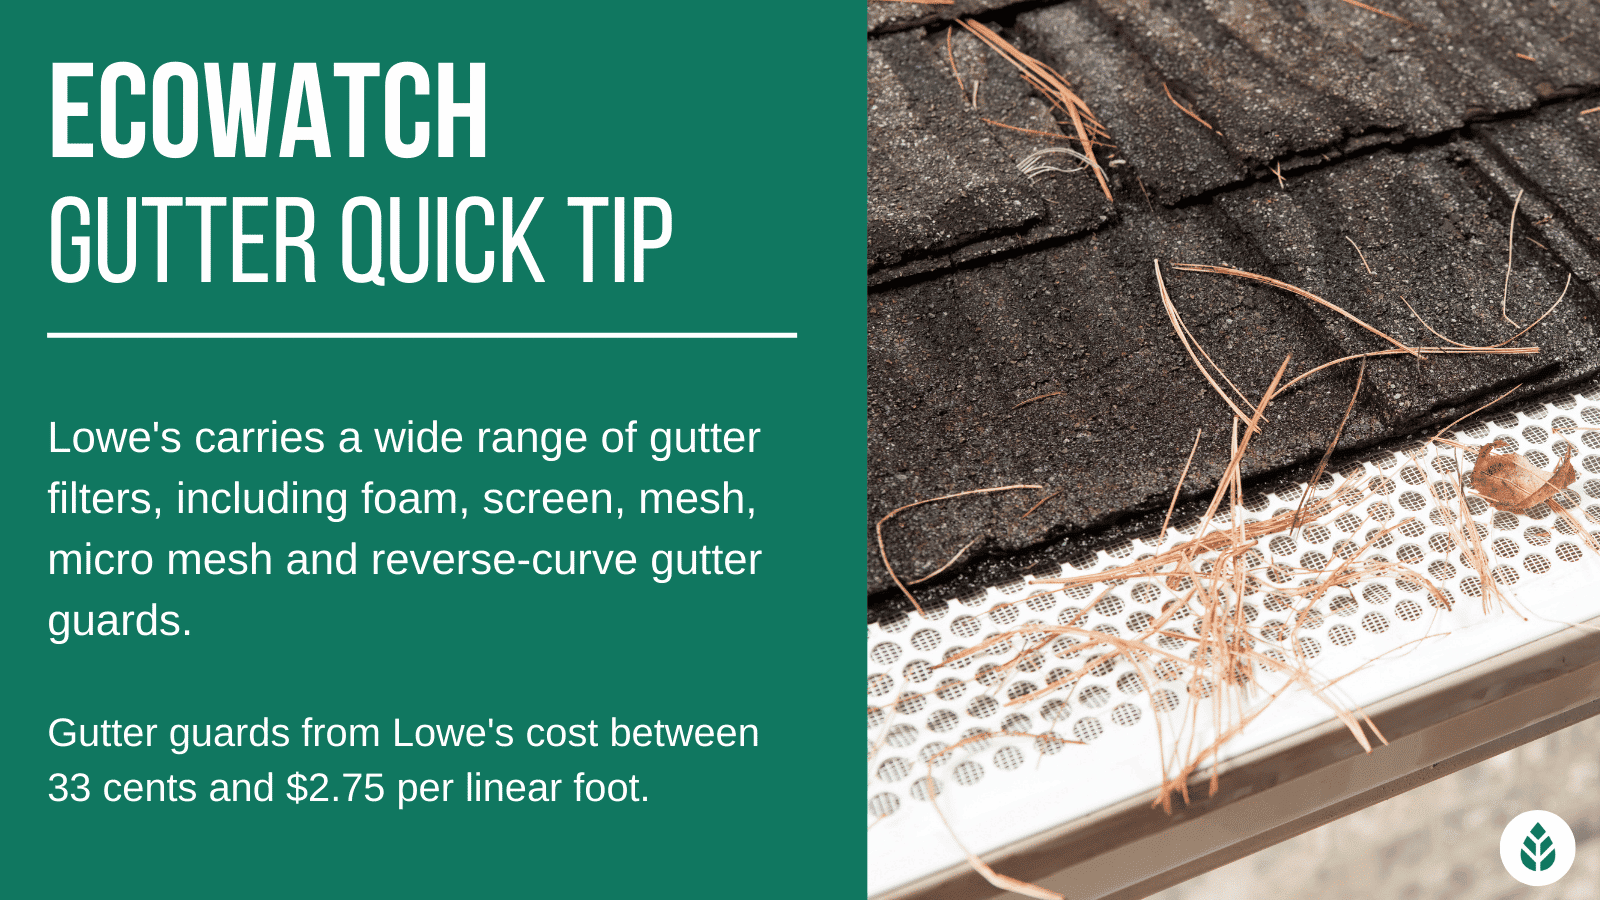 lowe's gutter guard review quick tip